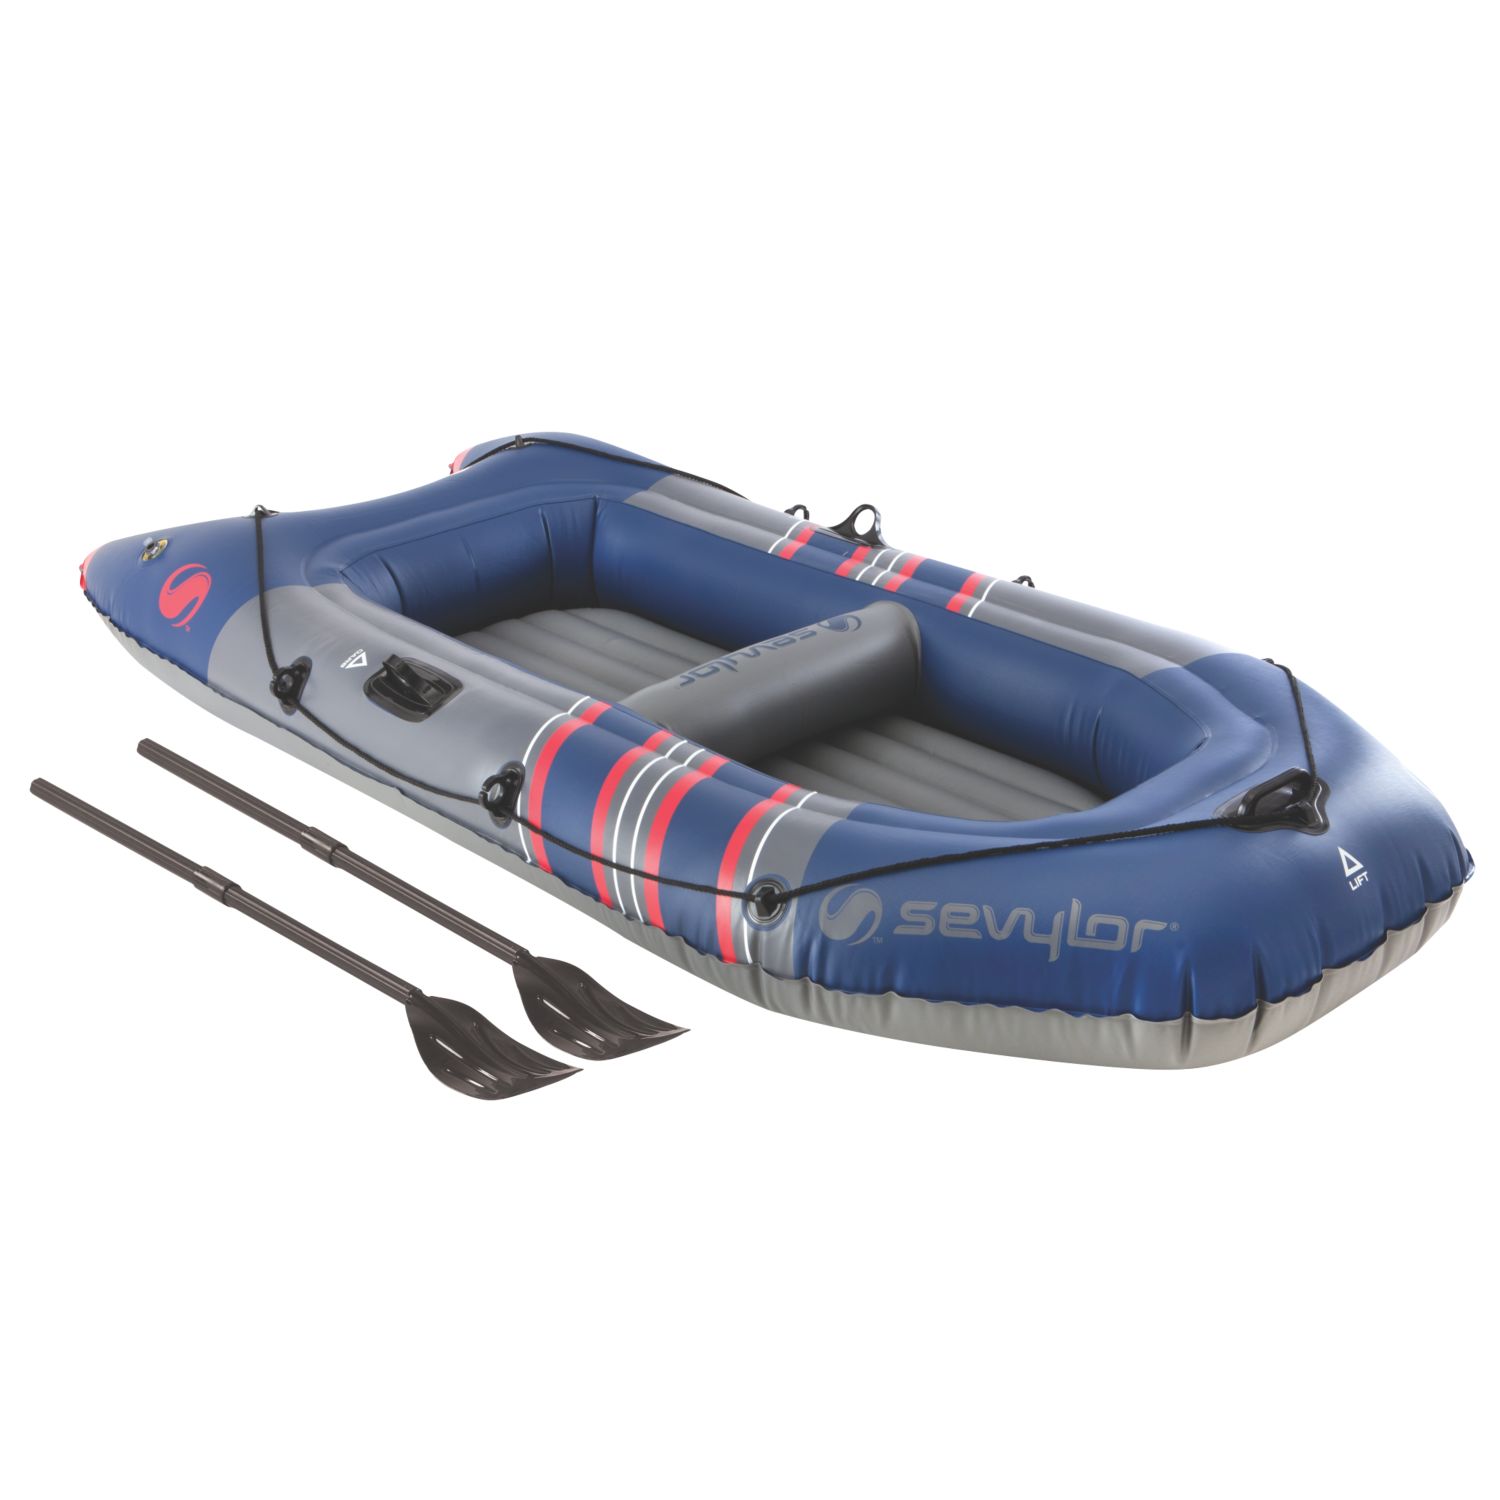 Sevylor Colossus 3-Person Inflatable Boat - image 1 of 4